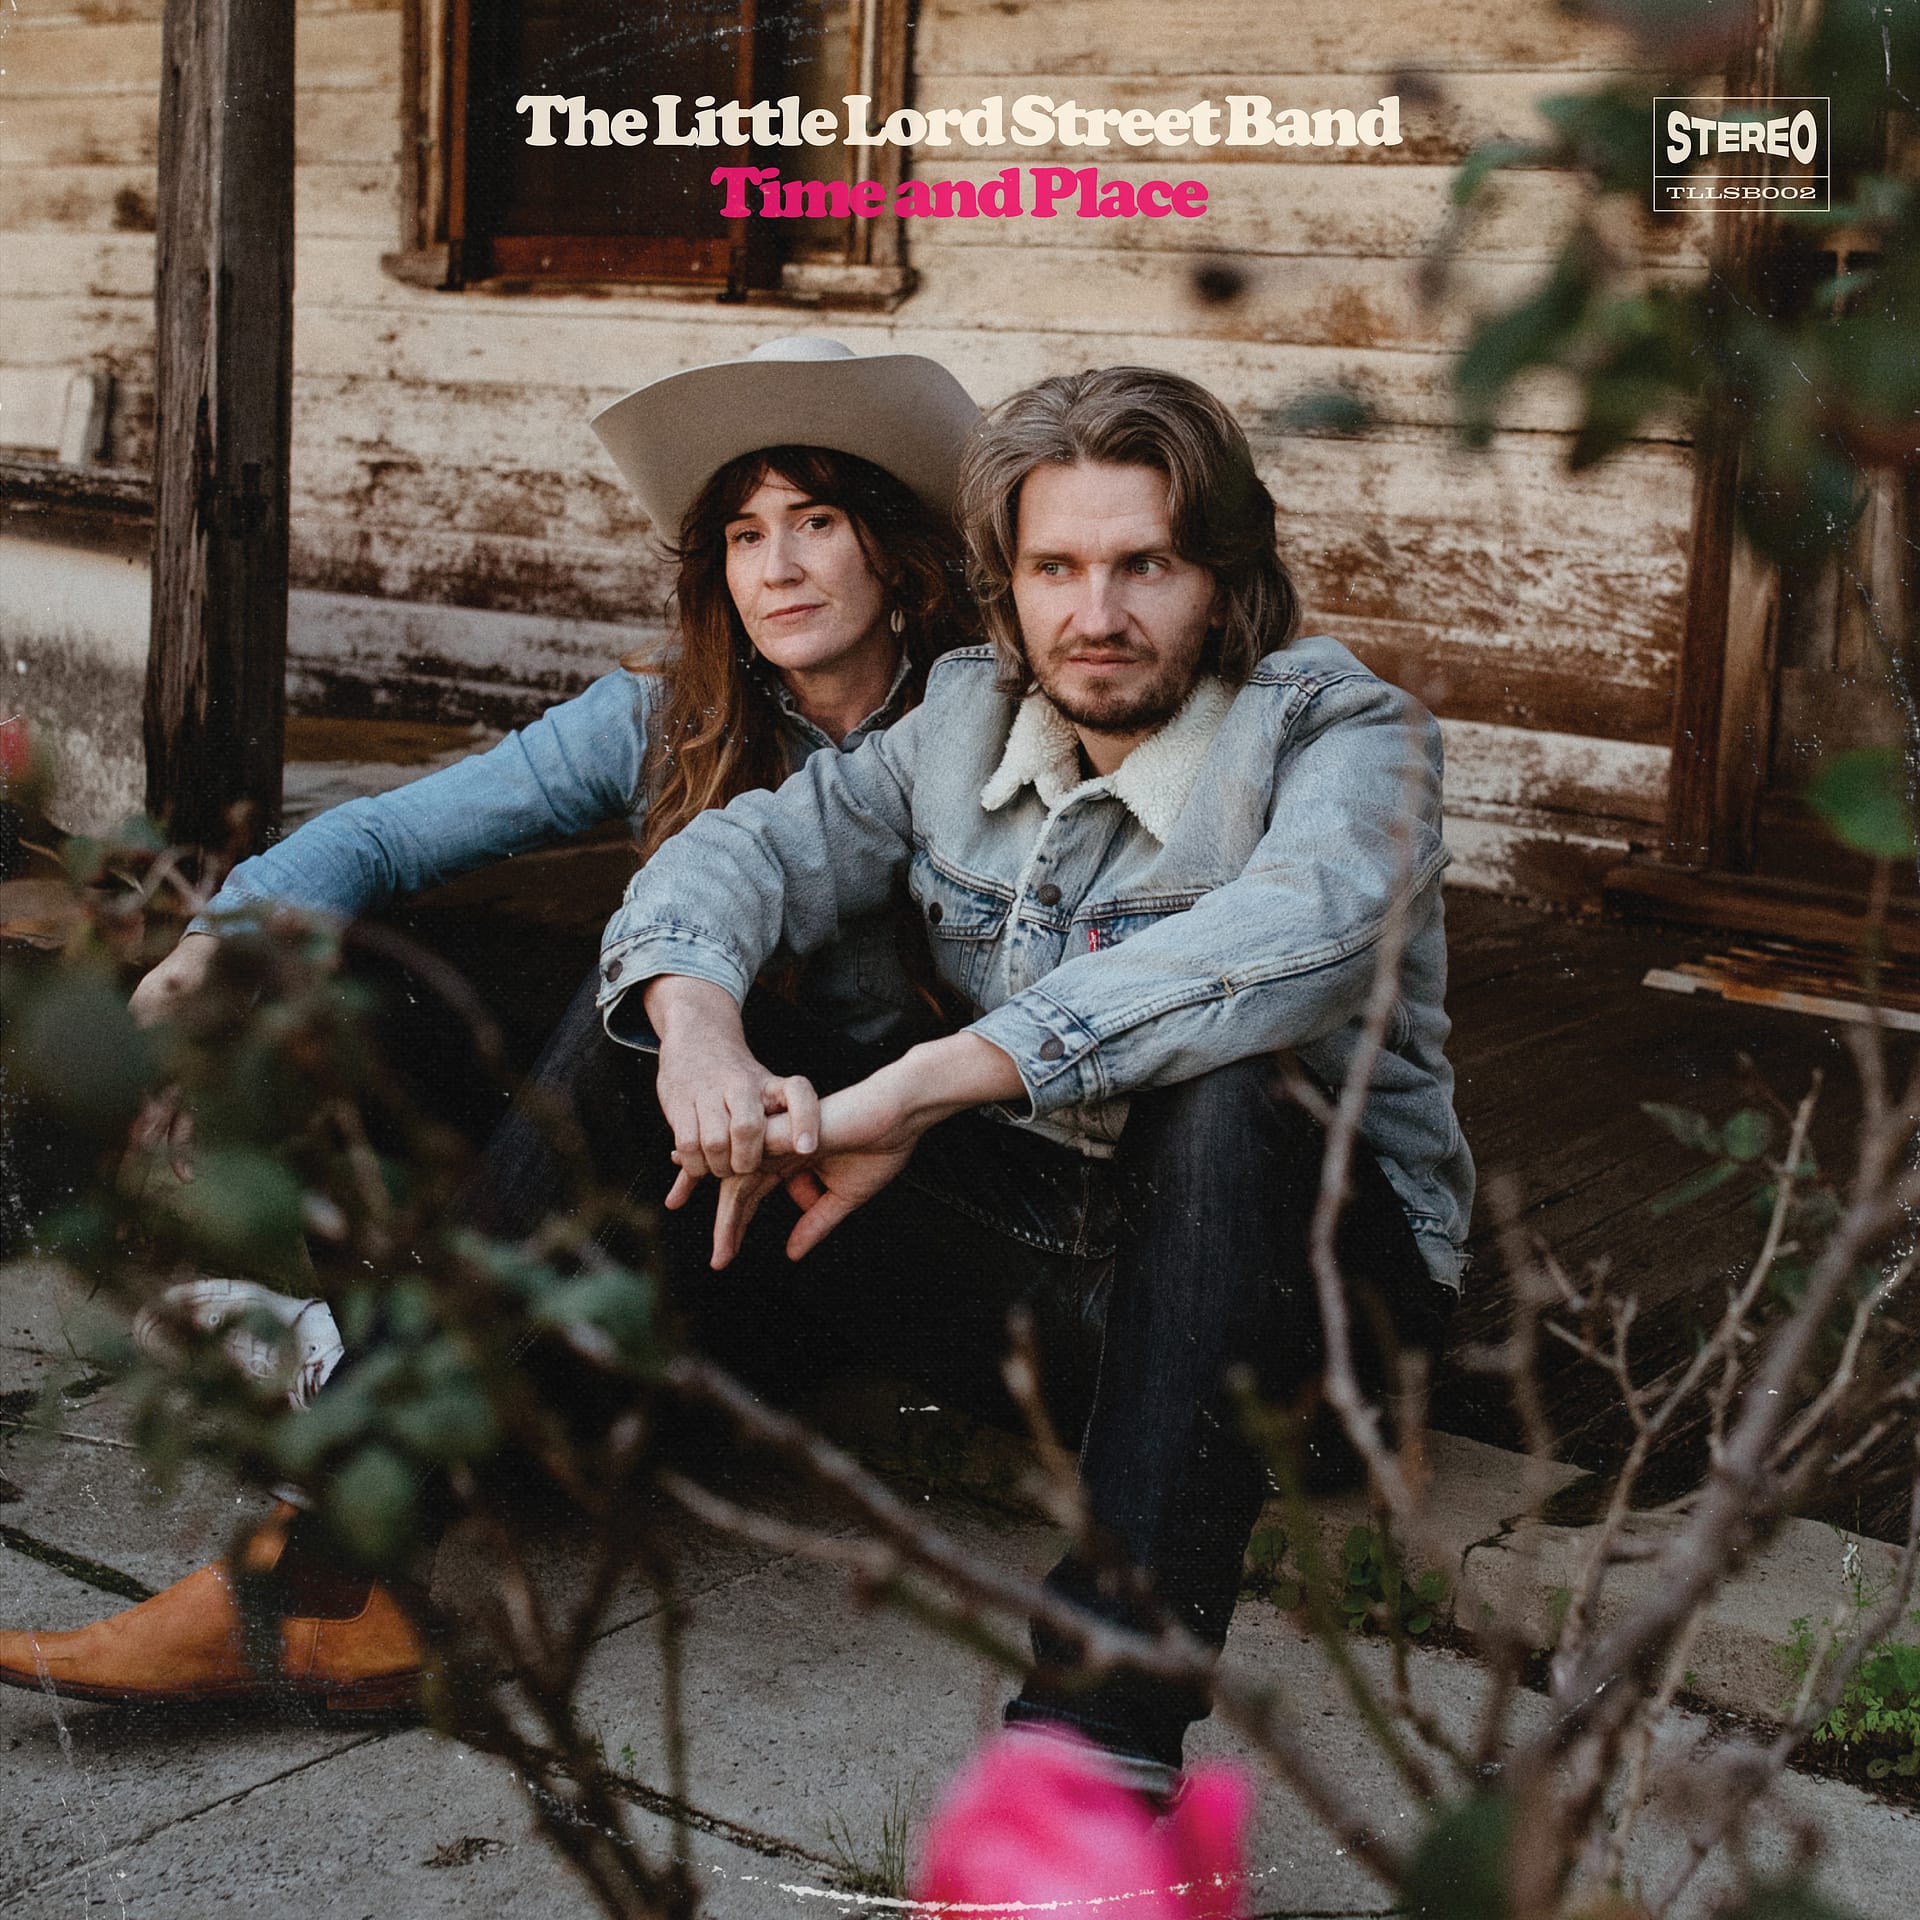 THE LITTLE LORD STREET BAND Tell A Thousand Stories On New Album ‘Time and Place’